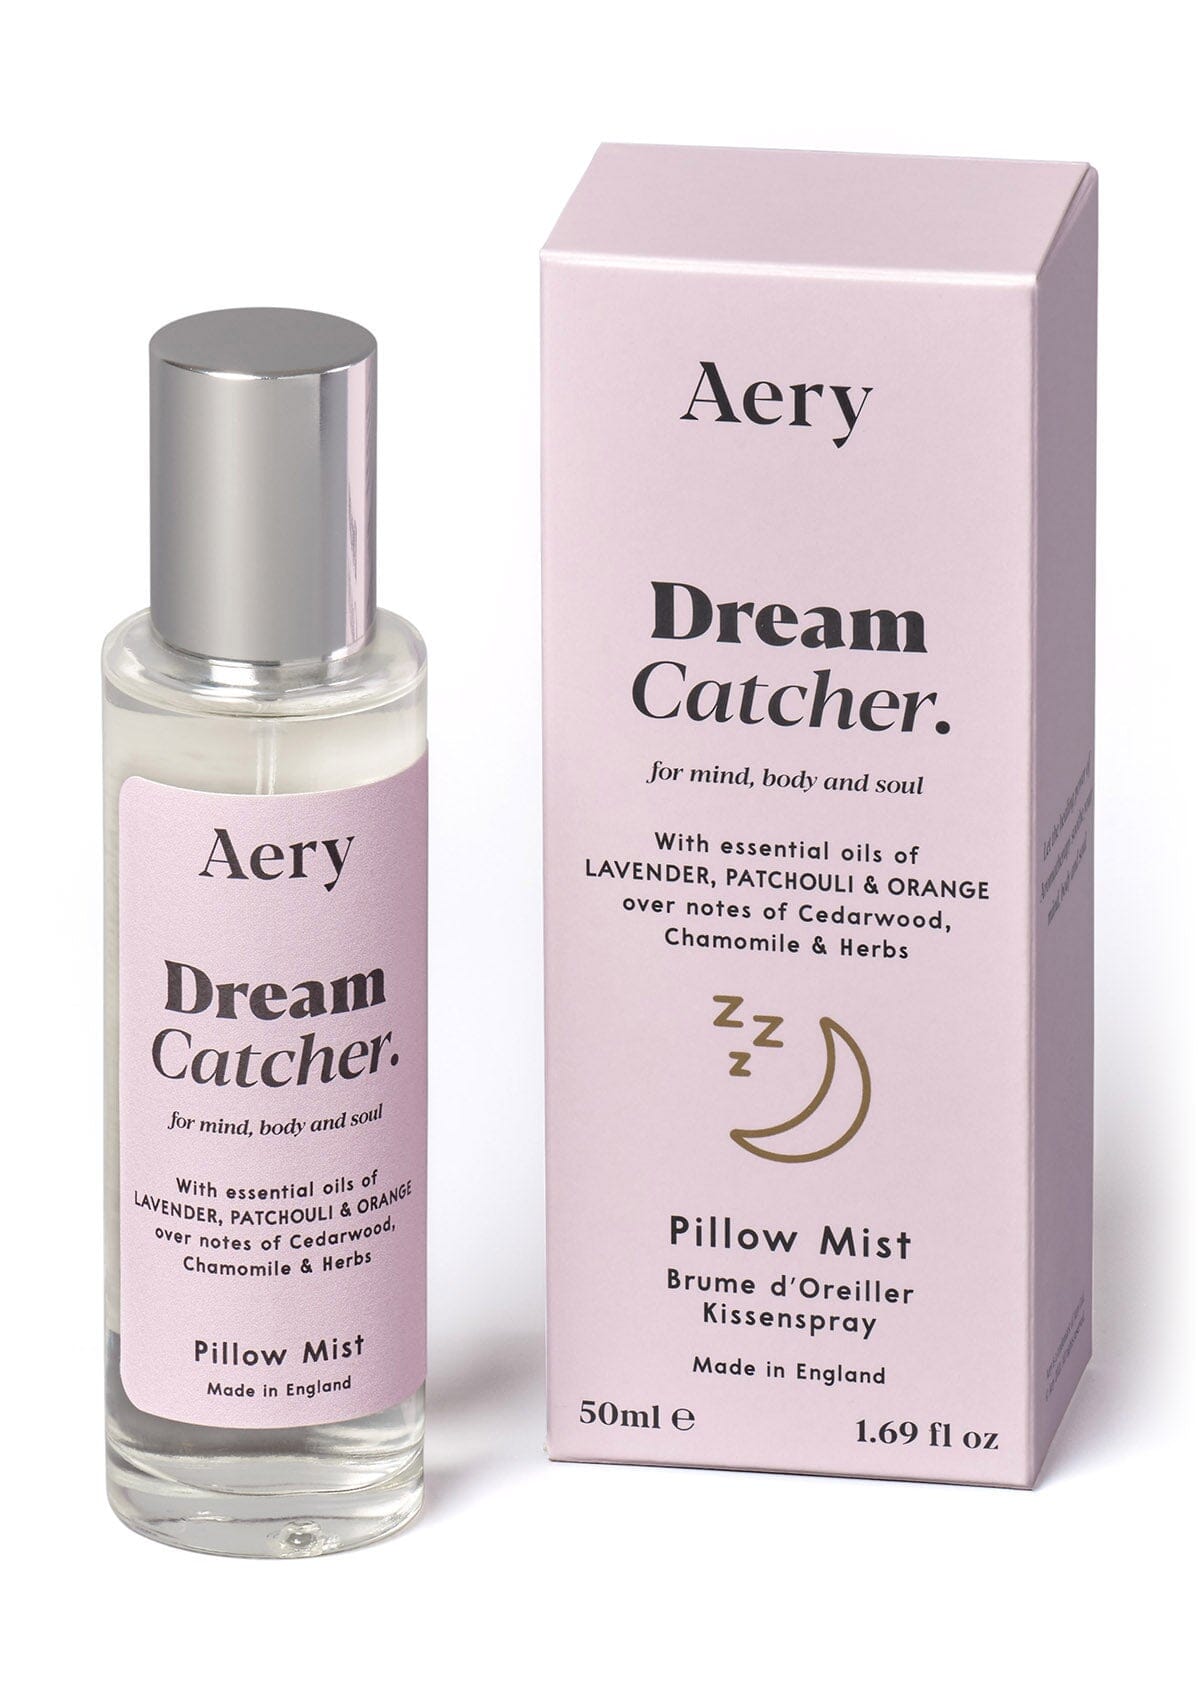 Lilac Dream Catcher pillow mist by Aery displayed next to product packaging on white background 